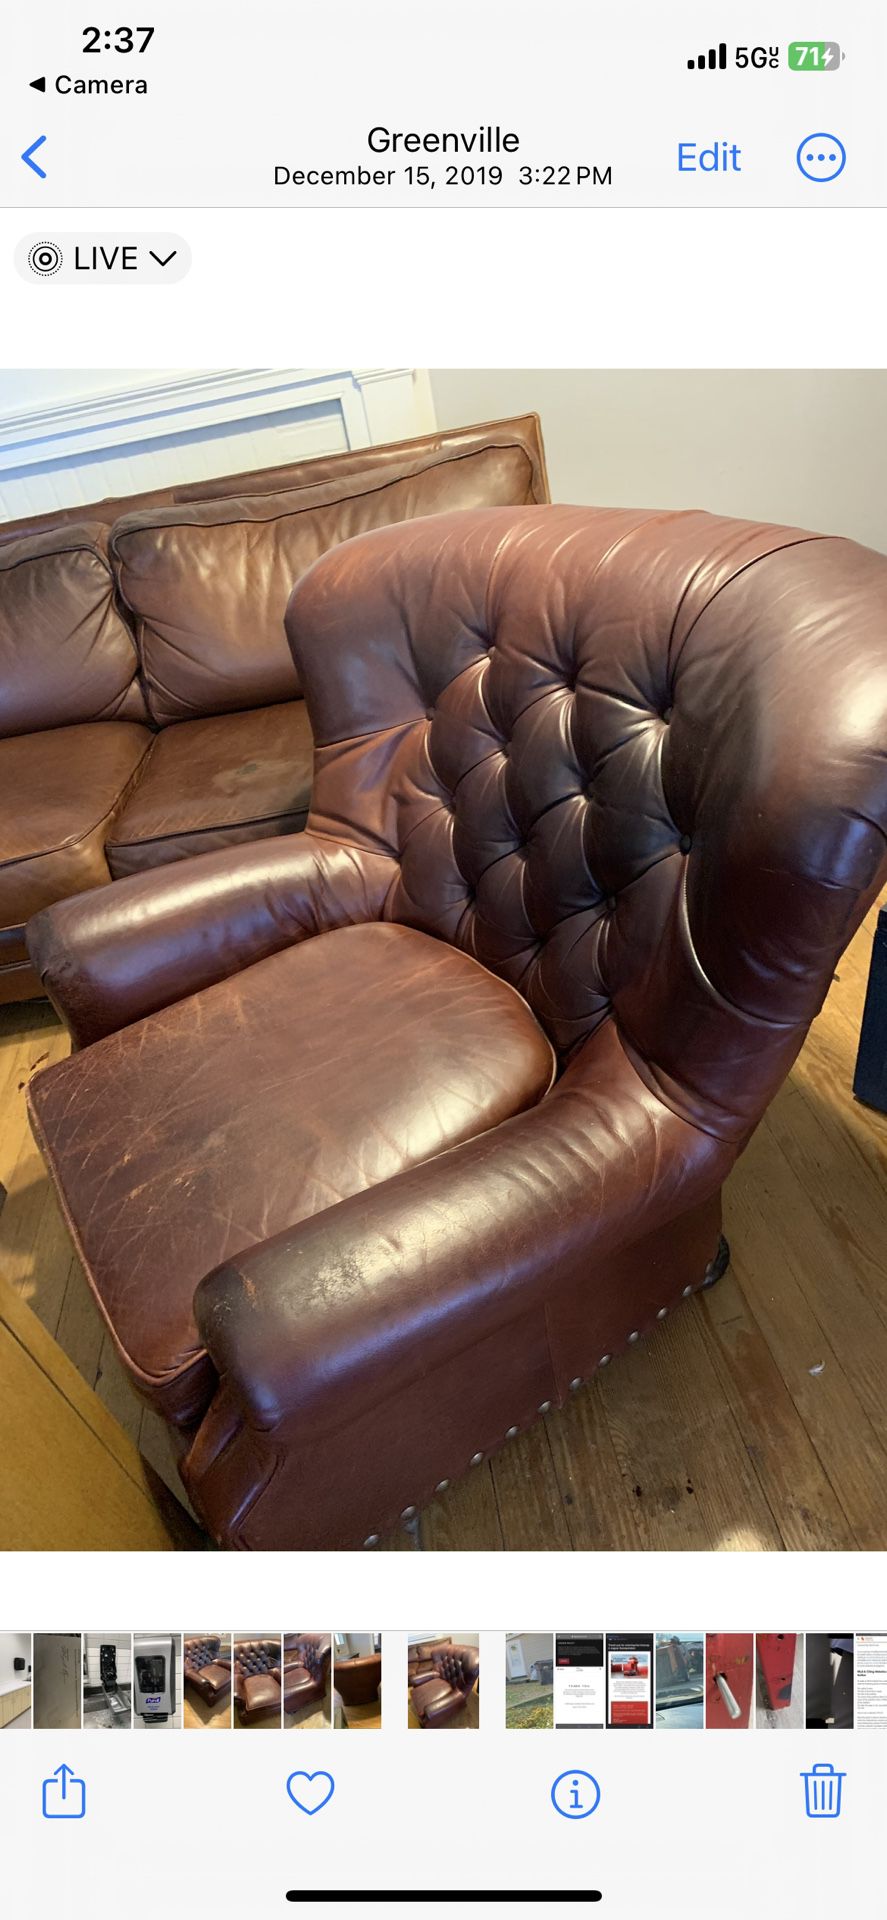 Amazing All Leather Chair 